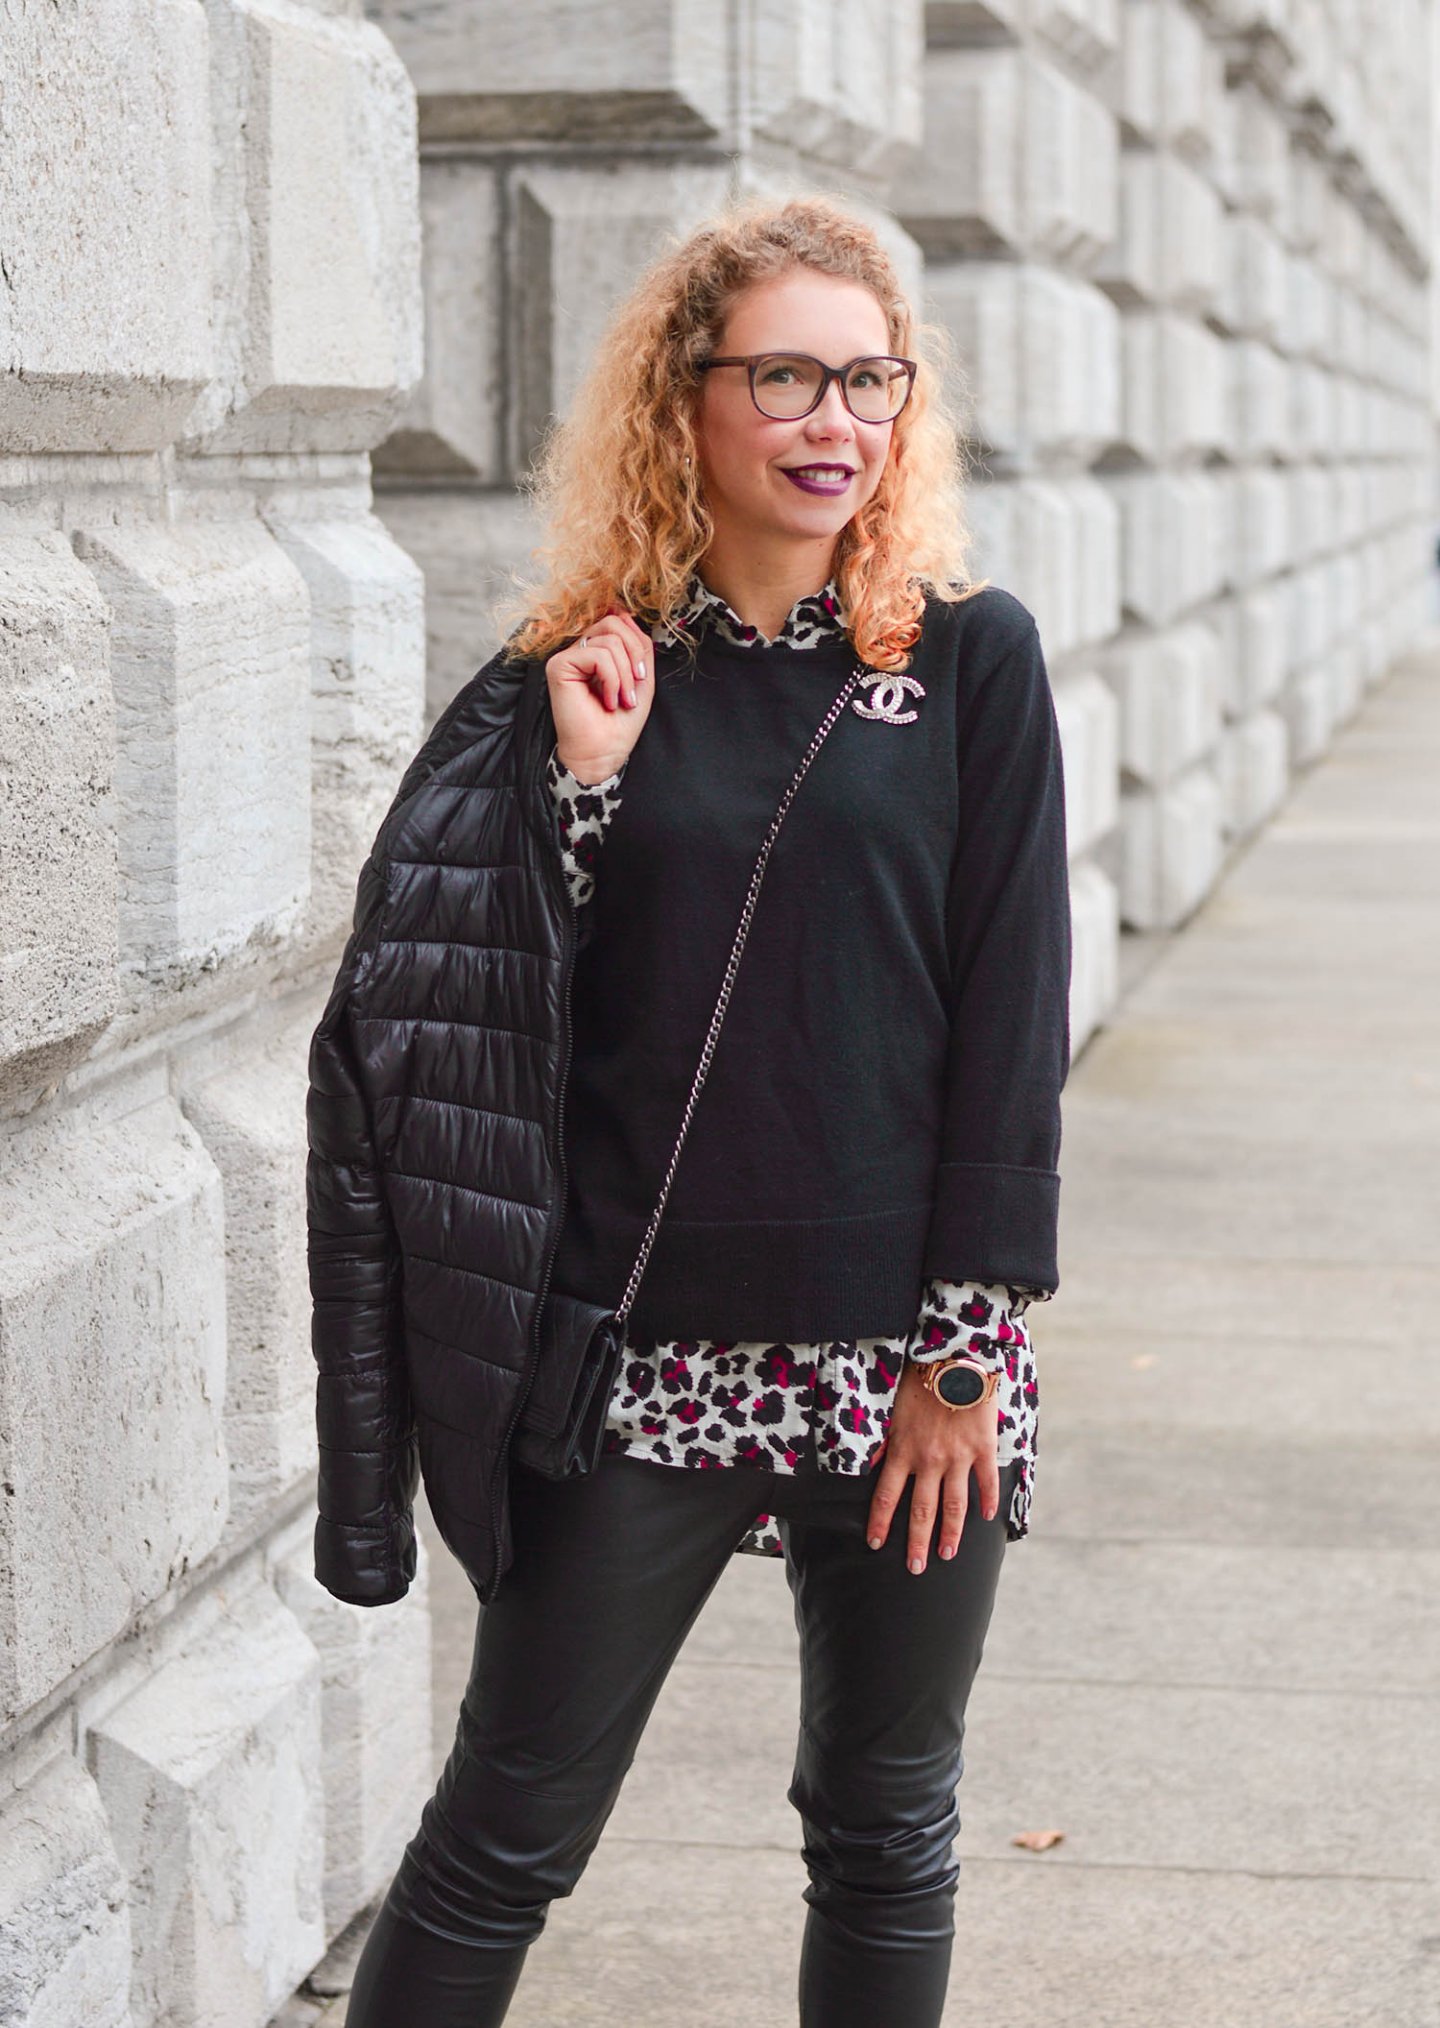 Sweater-and-Blouse-Combo-with-Quilted-Jacket-Leather-Pants-Adidas-Falcon-Kationette-Fashionblogger-Germany